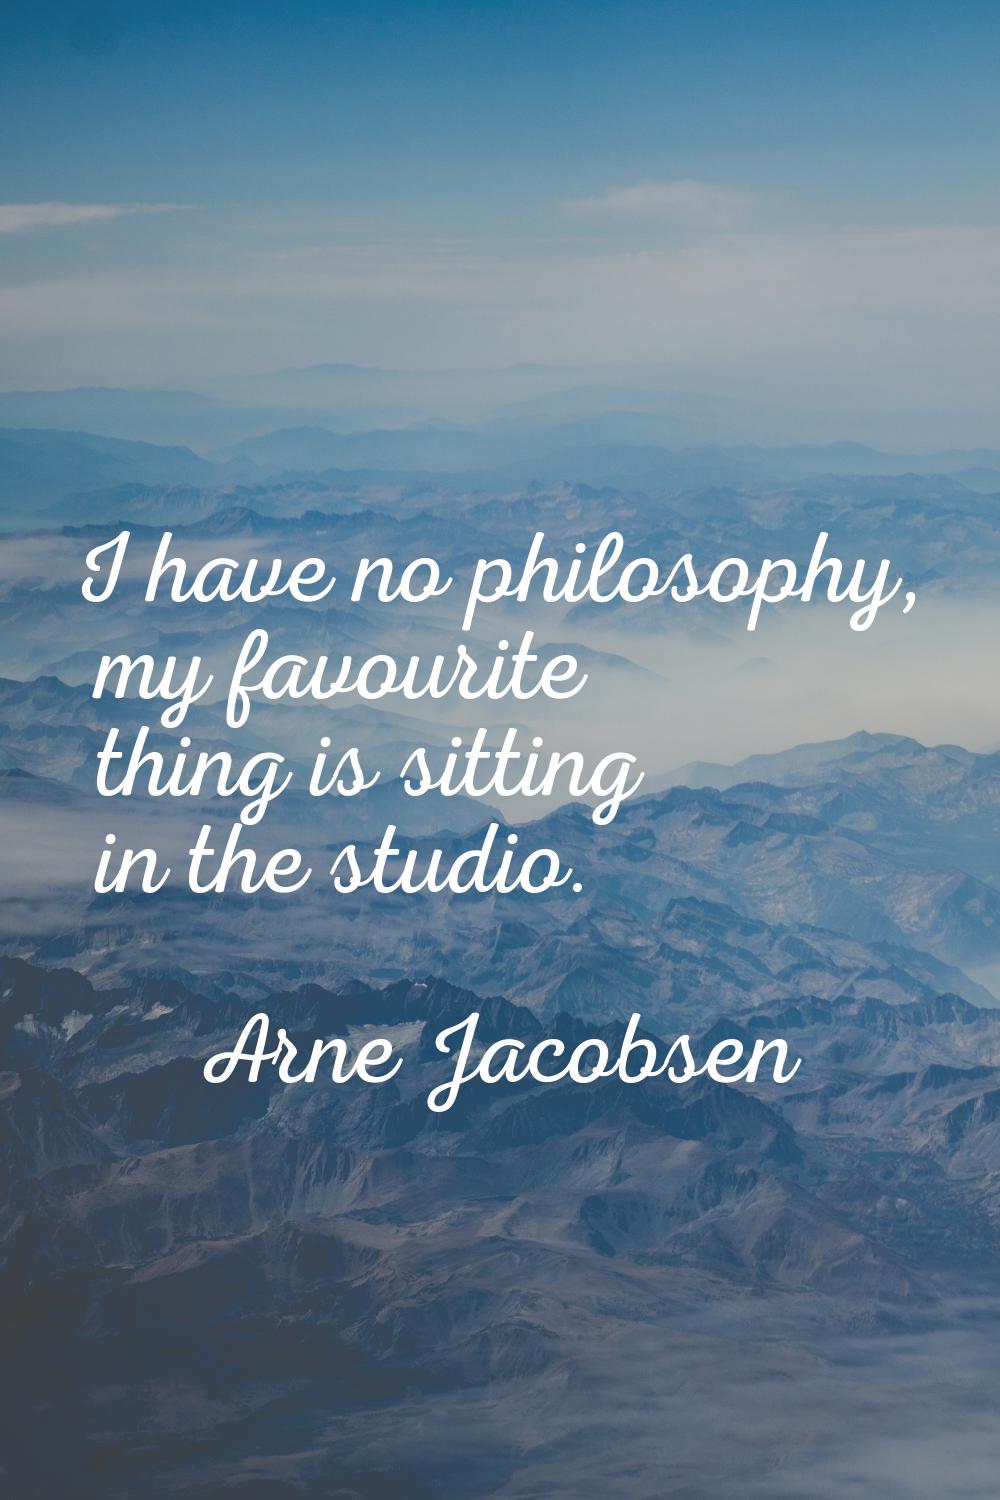 I have no philosophy, my favourite thing is sitting in the studio.